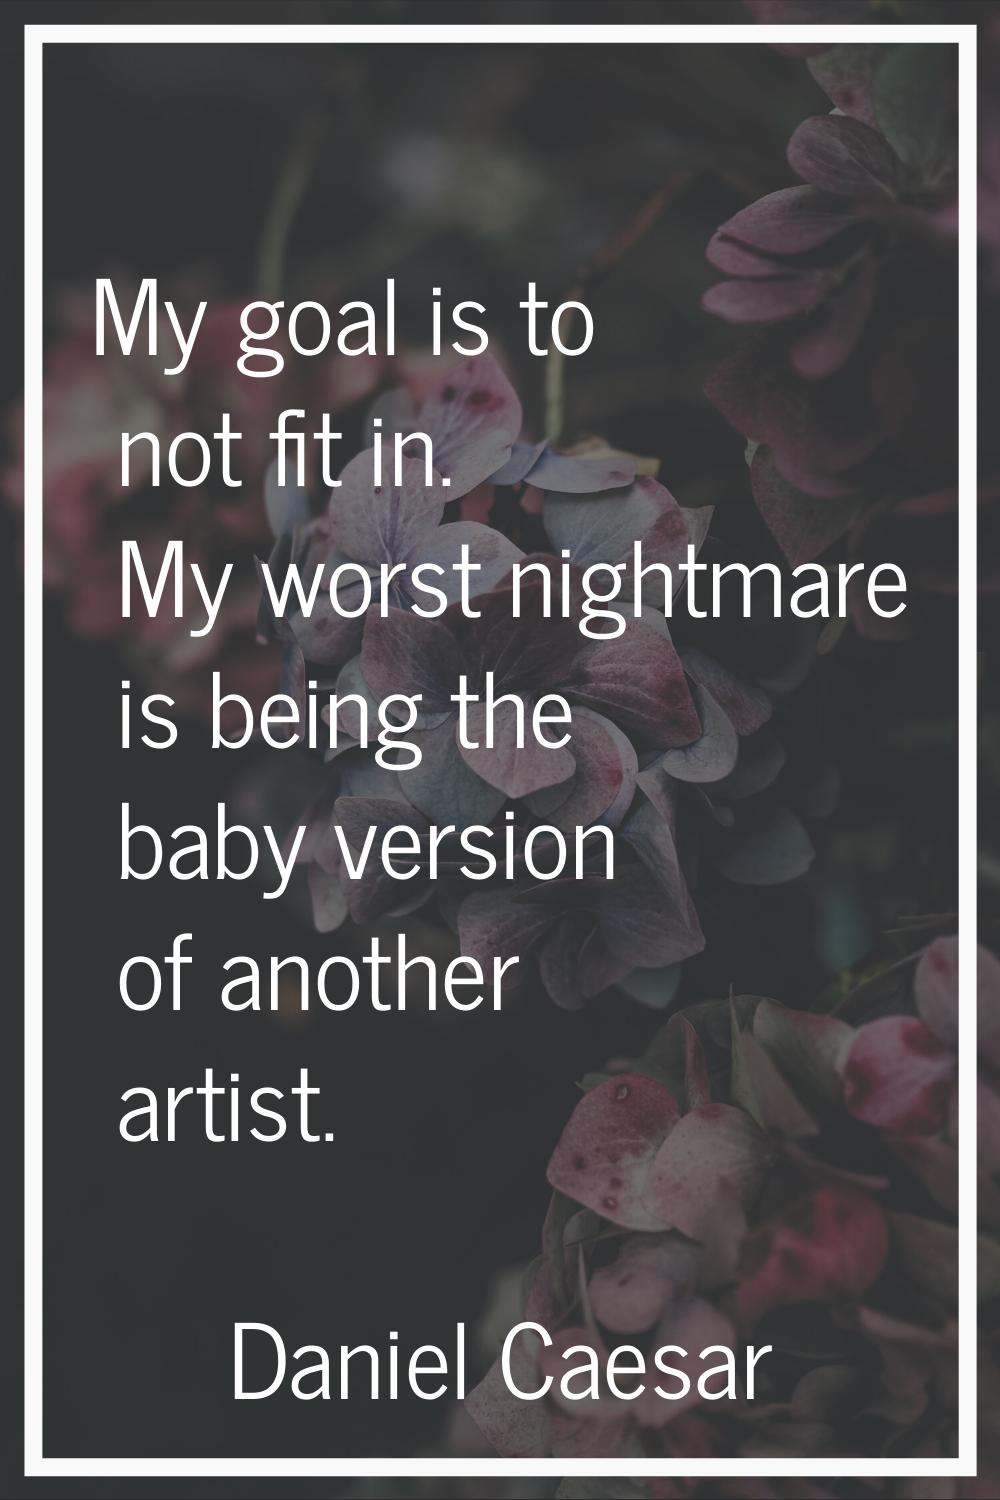 My goal is to not fit in. My worst nightmare is being the baby version of another artist.